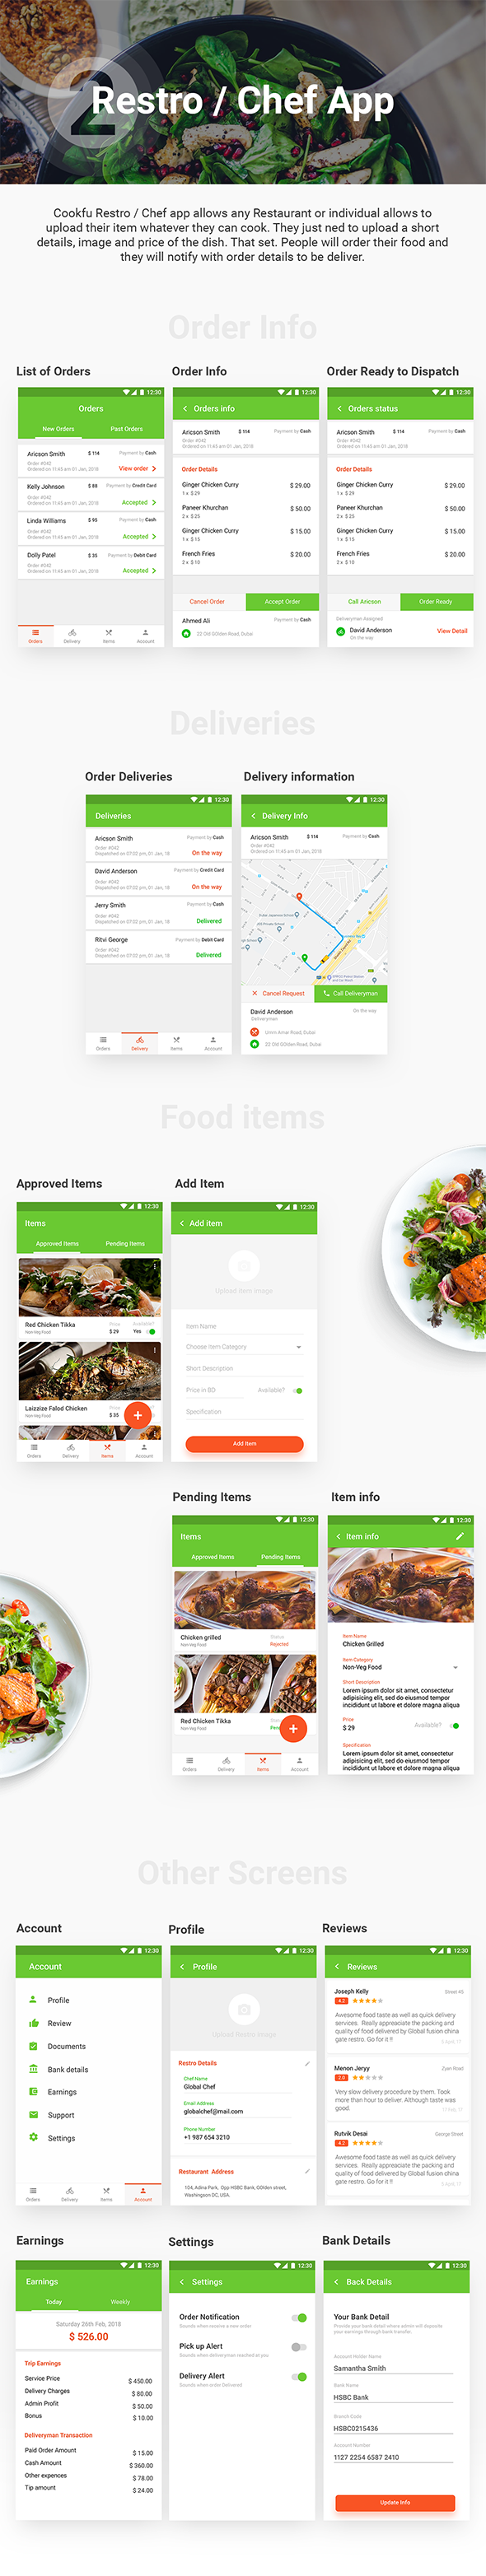 Food Delivery App & Food Ordering App|Android + iOS App Template|3 Apps| Multi Restro Cookfu (IONIC) - 4